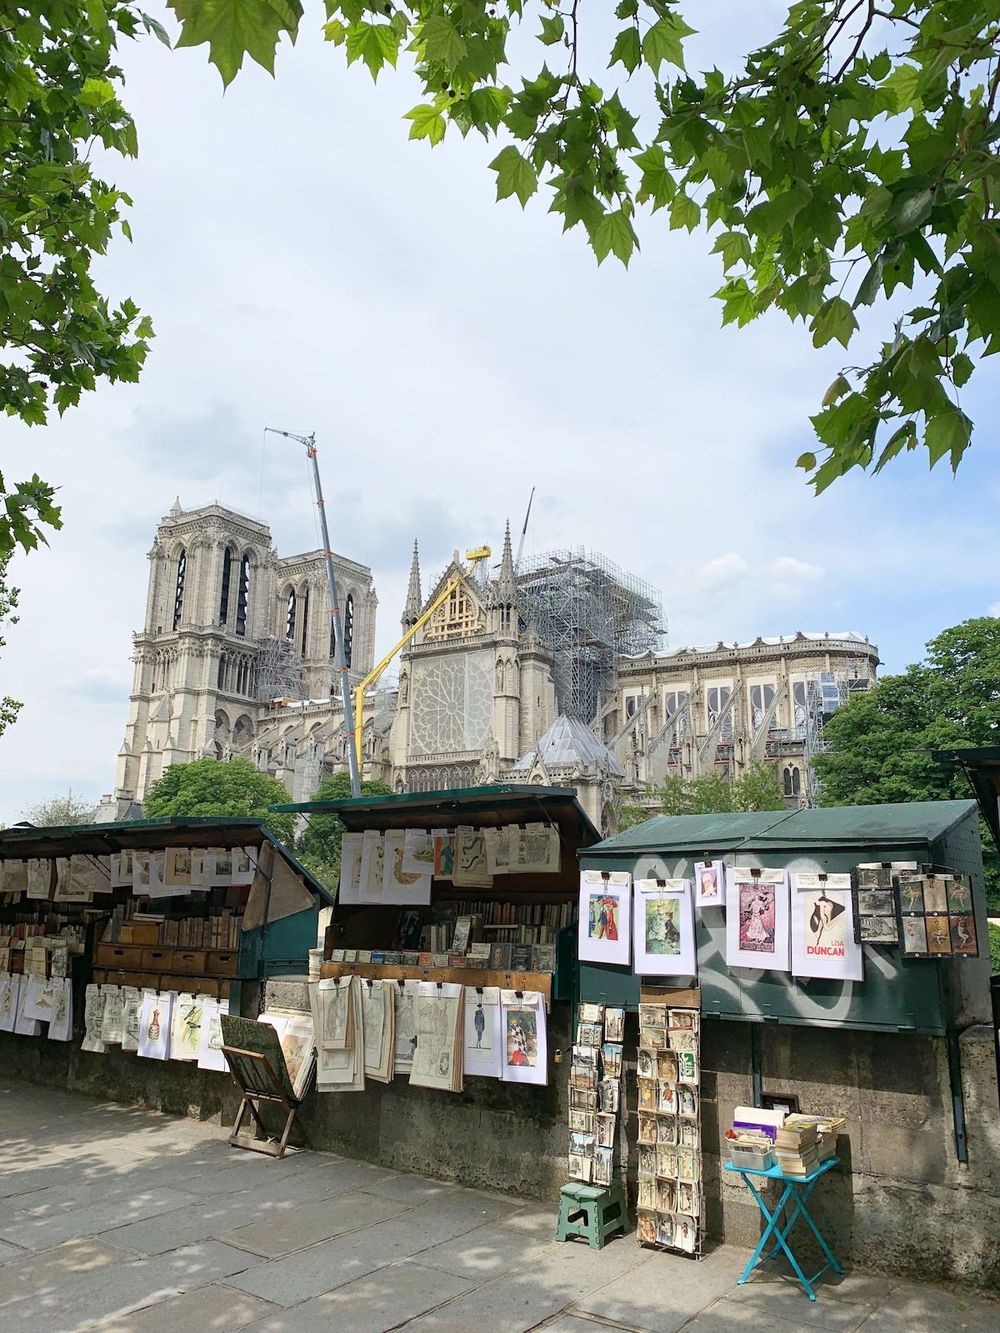 Bouquinistes Paris: famous Seine river booksellers in green stalls